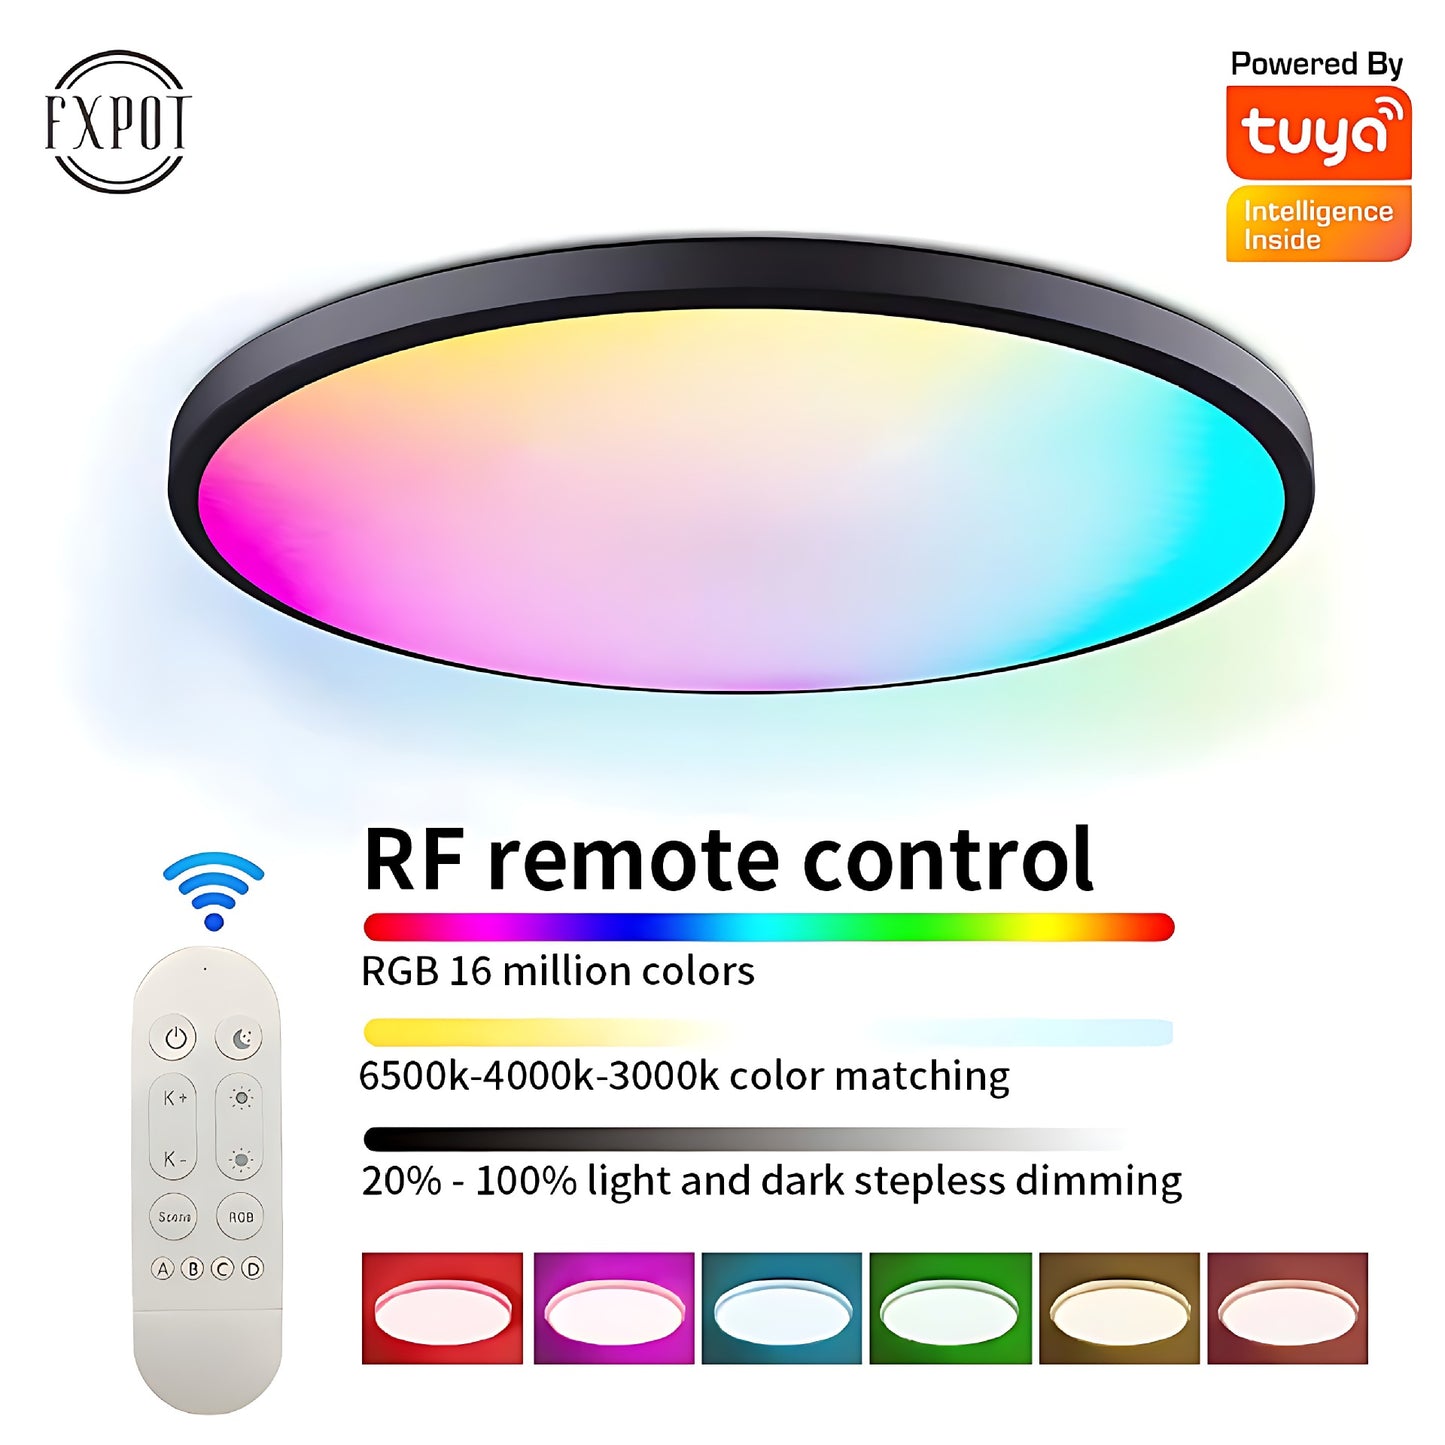 RGBCW Full Color Dimming Smart WiFi Ceiling Lamp